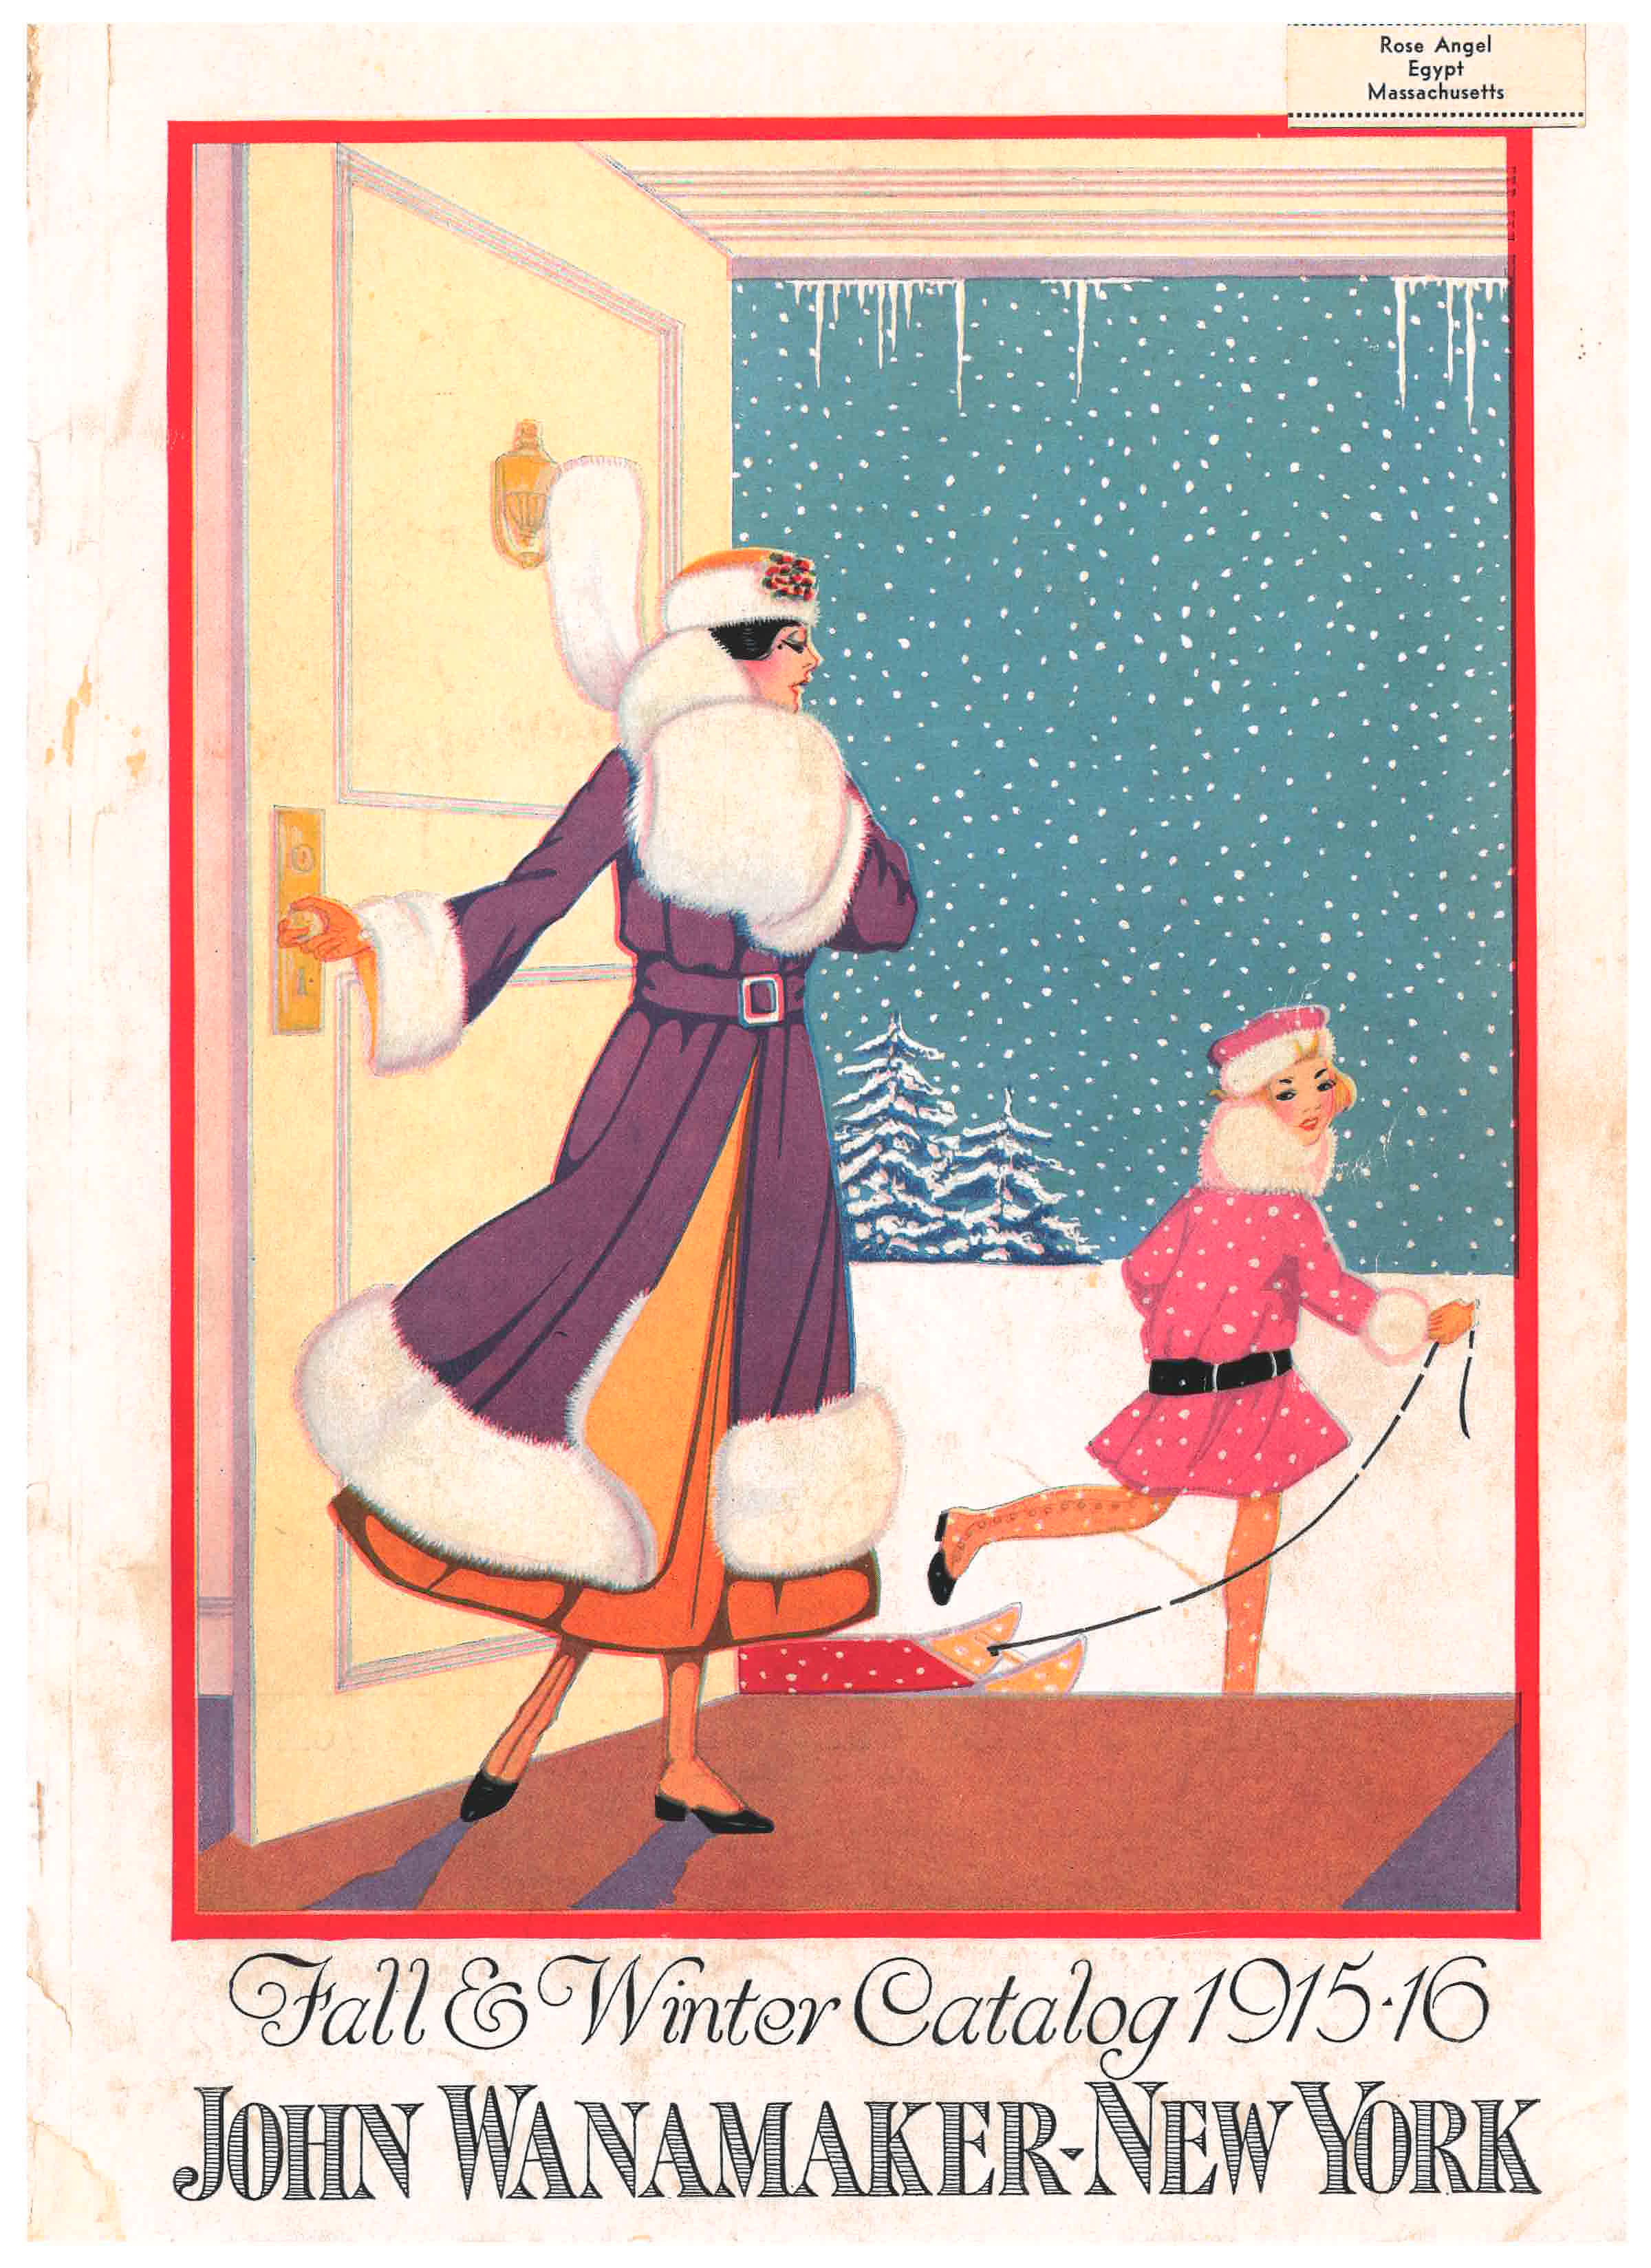 front cover of trade catalog showing lady and girl pulling sled walking outdoors into a snowy landscape